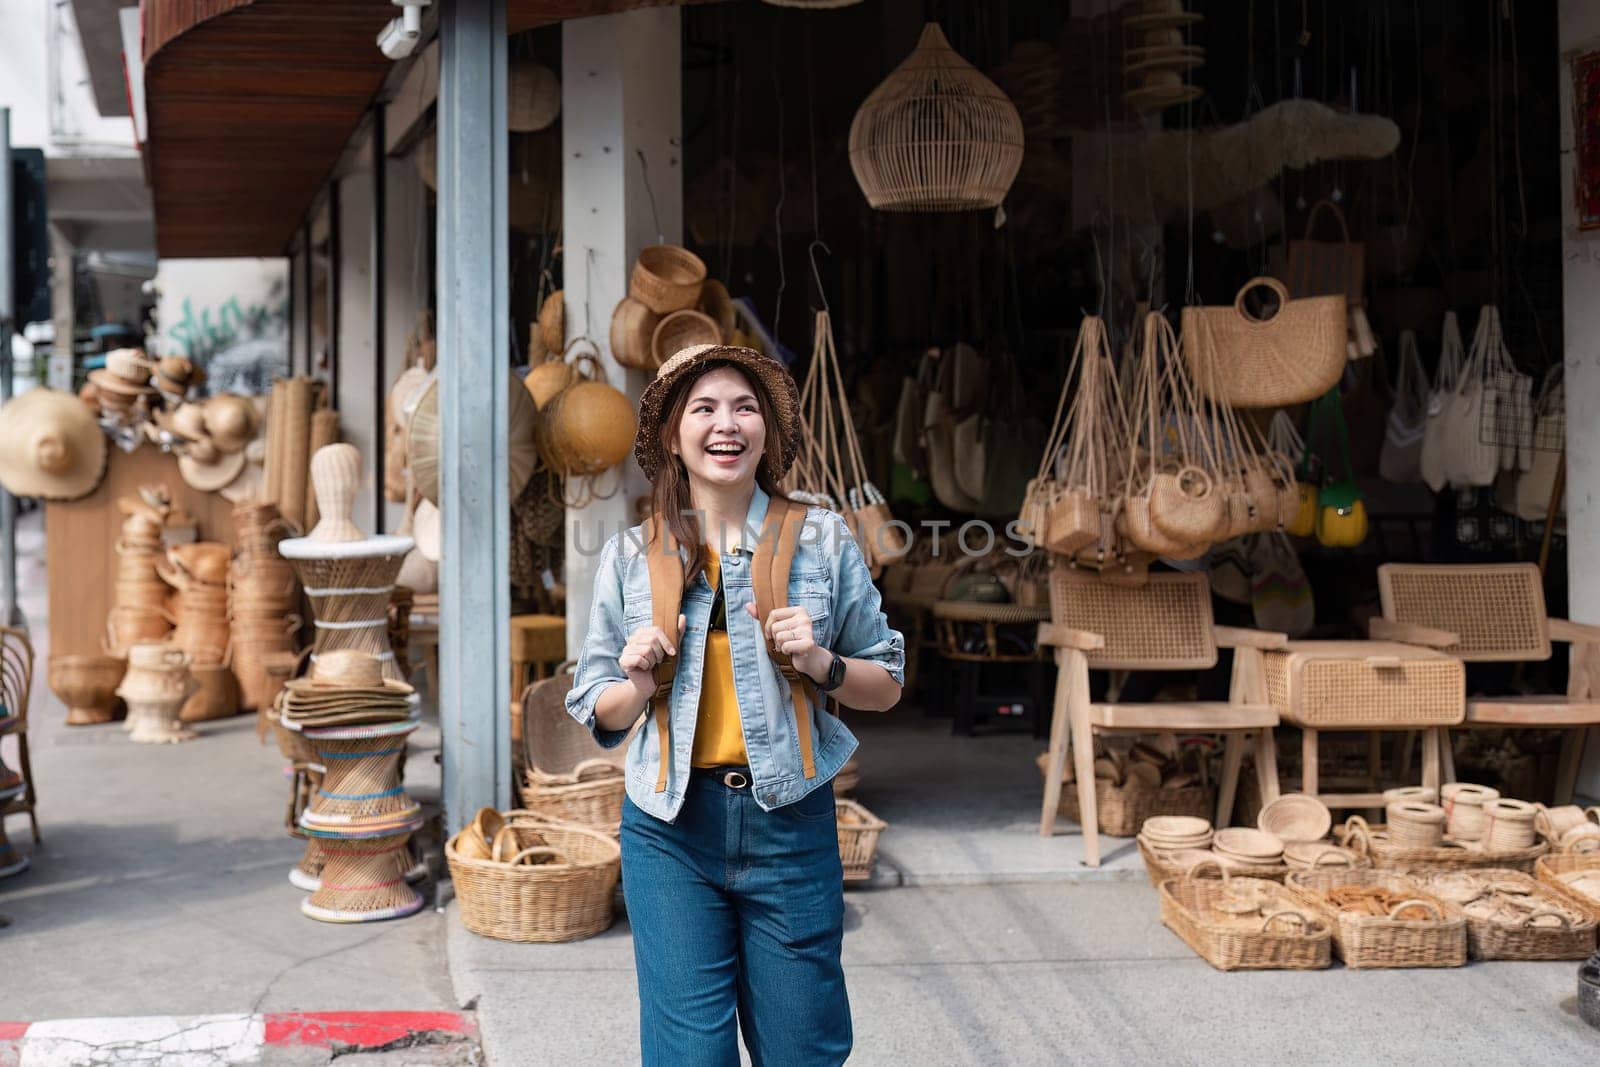 A cheerful traveler enjoying a day at a local market filled with handcrafted goods, showcasing the vibrant urban culture.